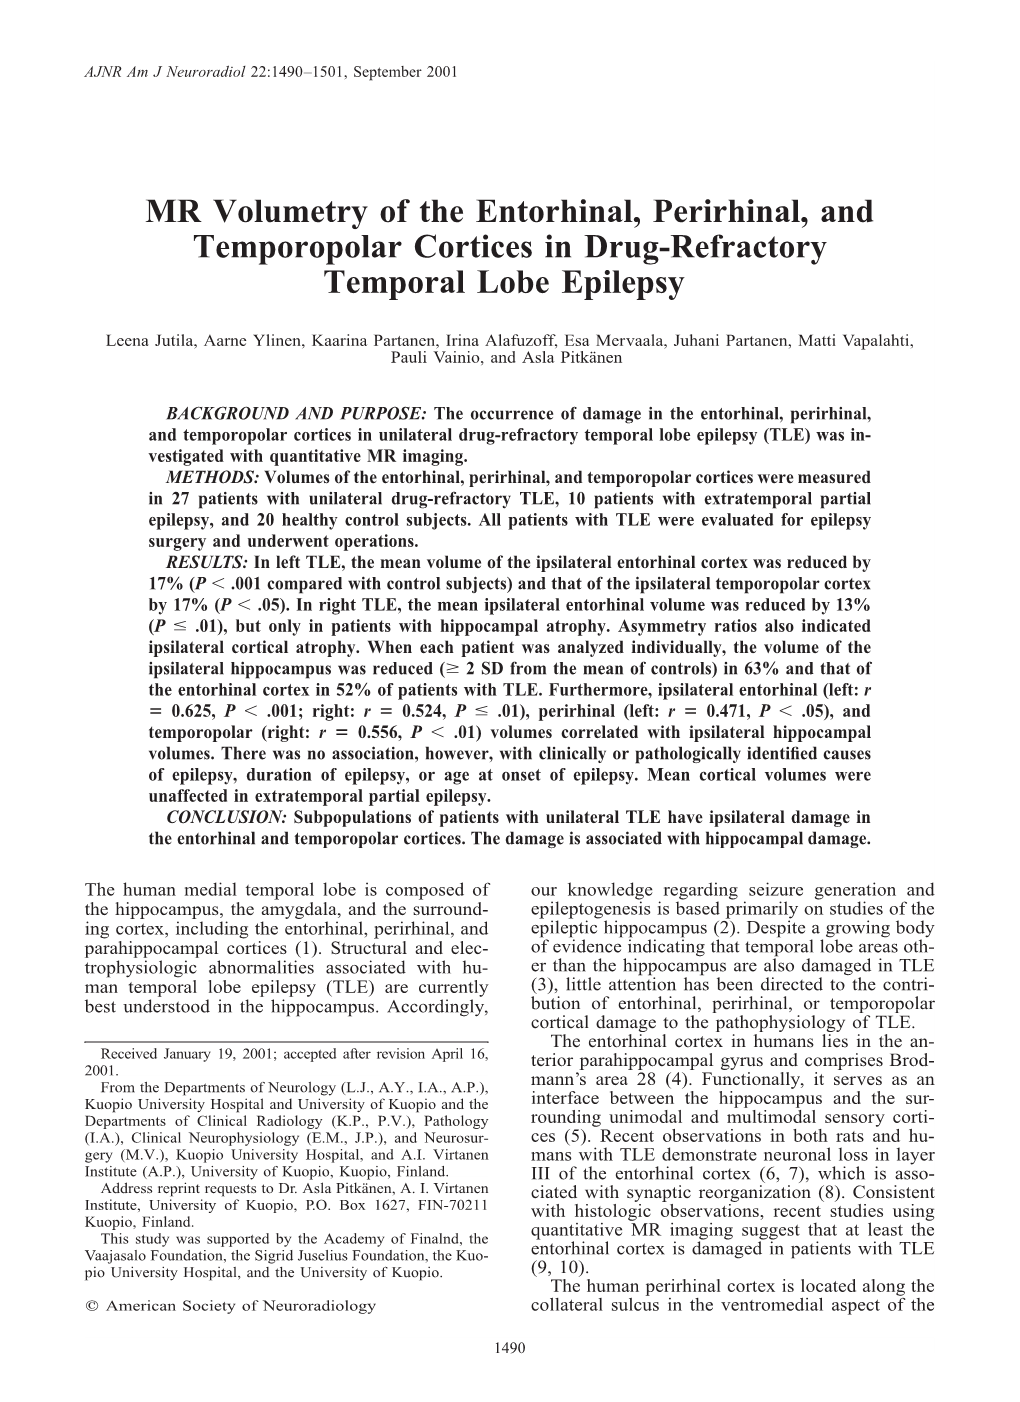 MR Volumetry of the Entorhinal, Perirhinal, and Temporopolar Cortices in Drug-Refractory Temporal Lobe Epilepsy